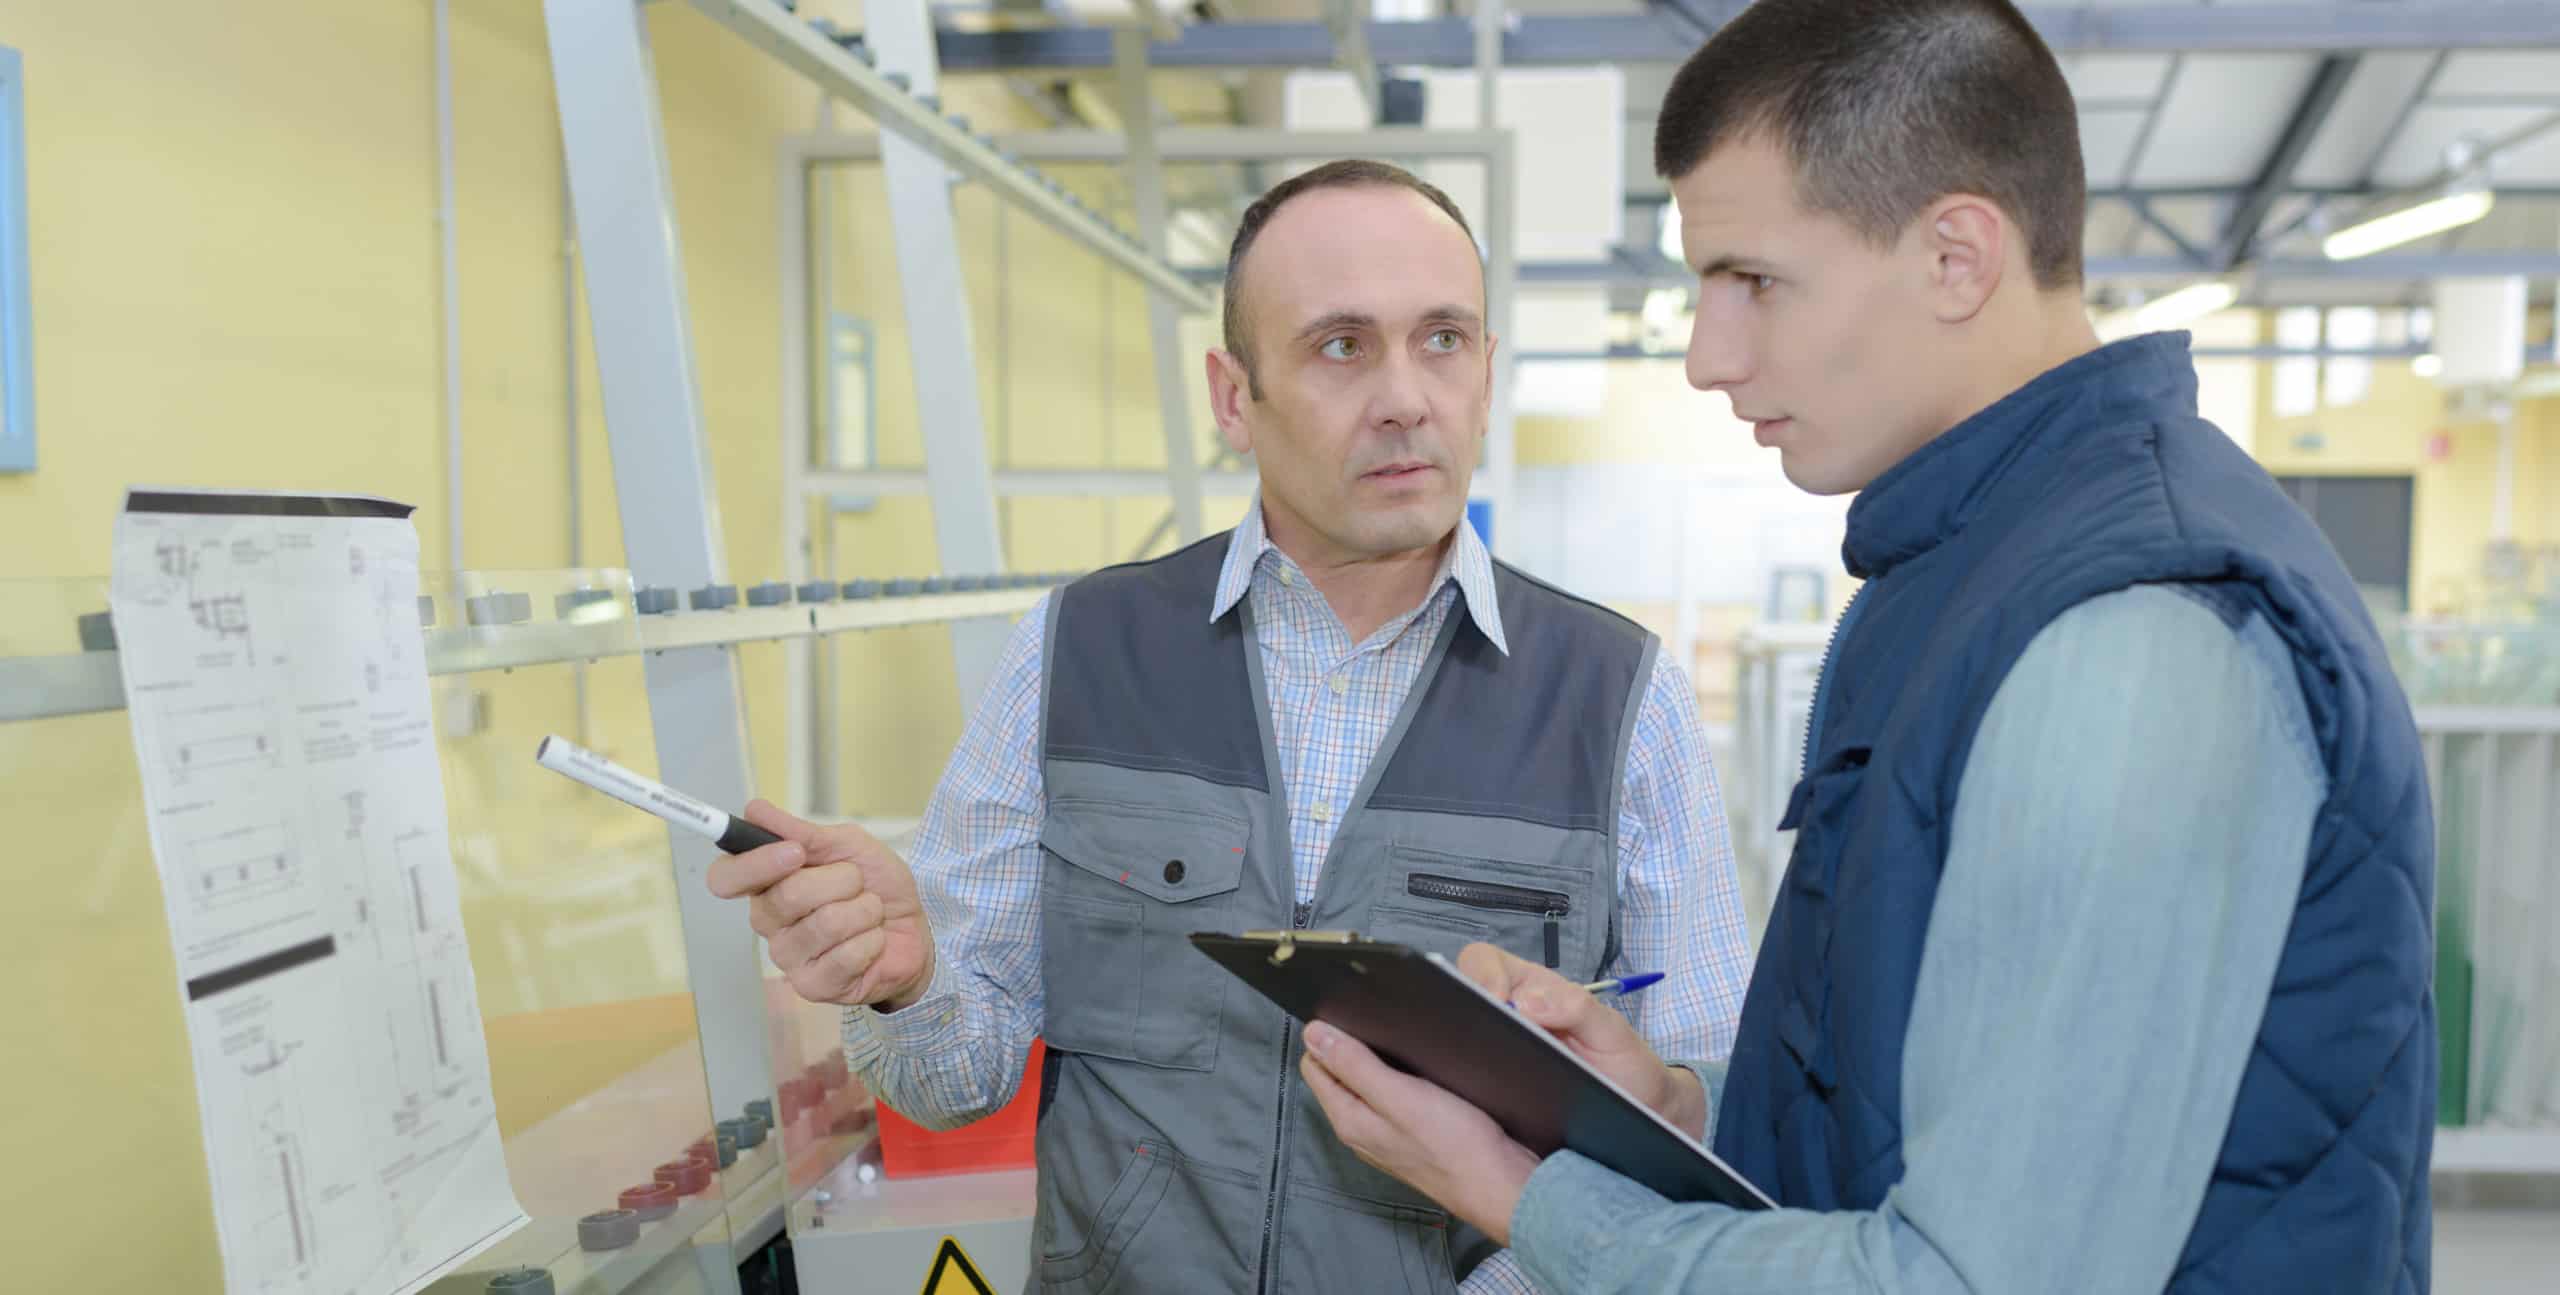 Man showing instructions chart to trainee